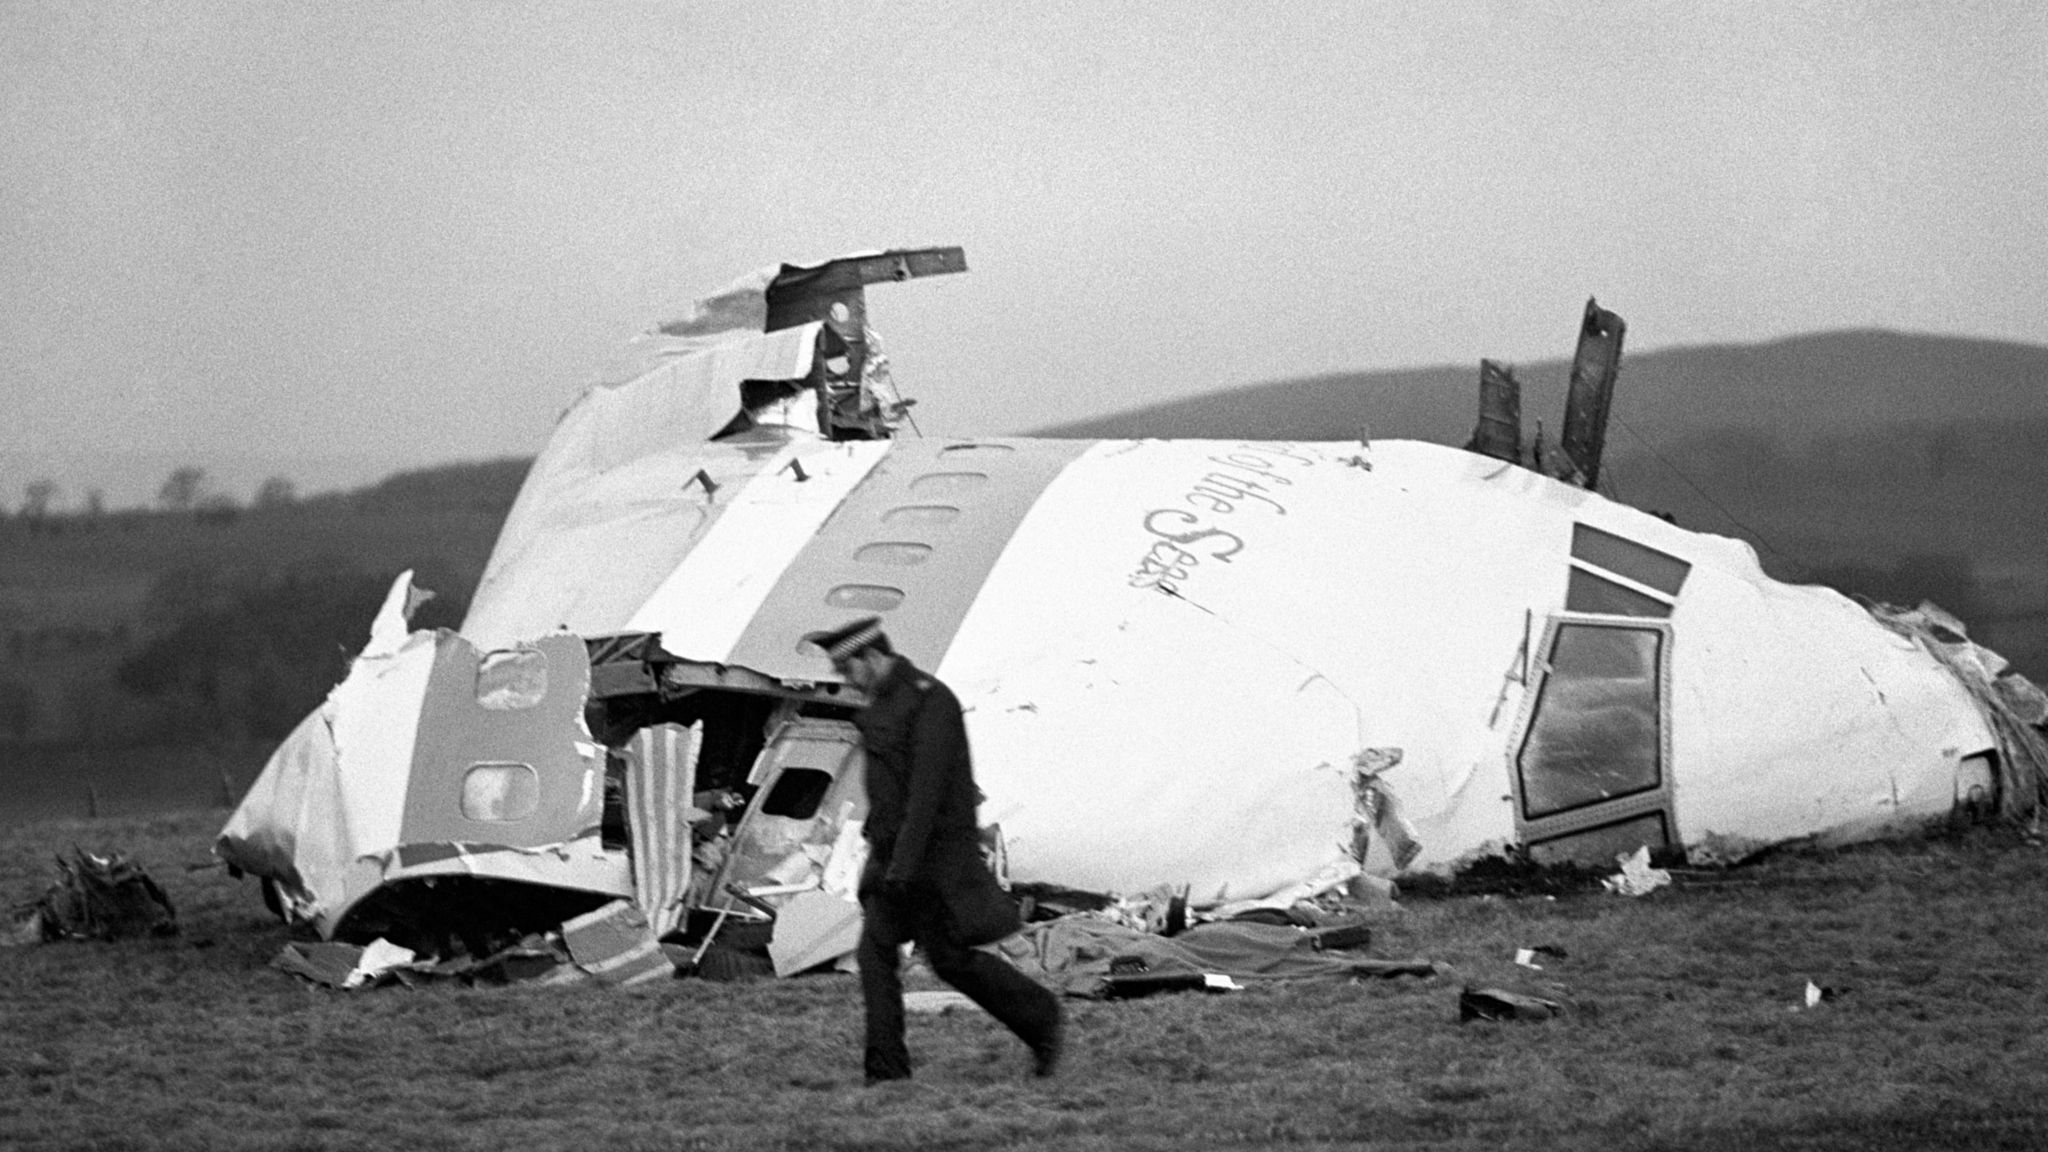 A police officer walks past the wrecked nose section of Pan Am flight 103 in a field at Lockerbie, December 22nd 1988, after the plane was blown apart by a terrorist bomb